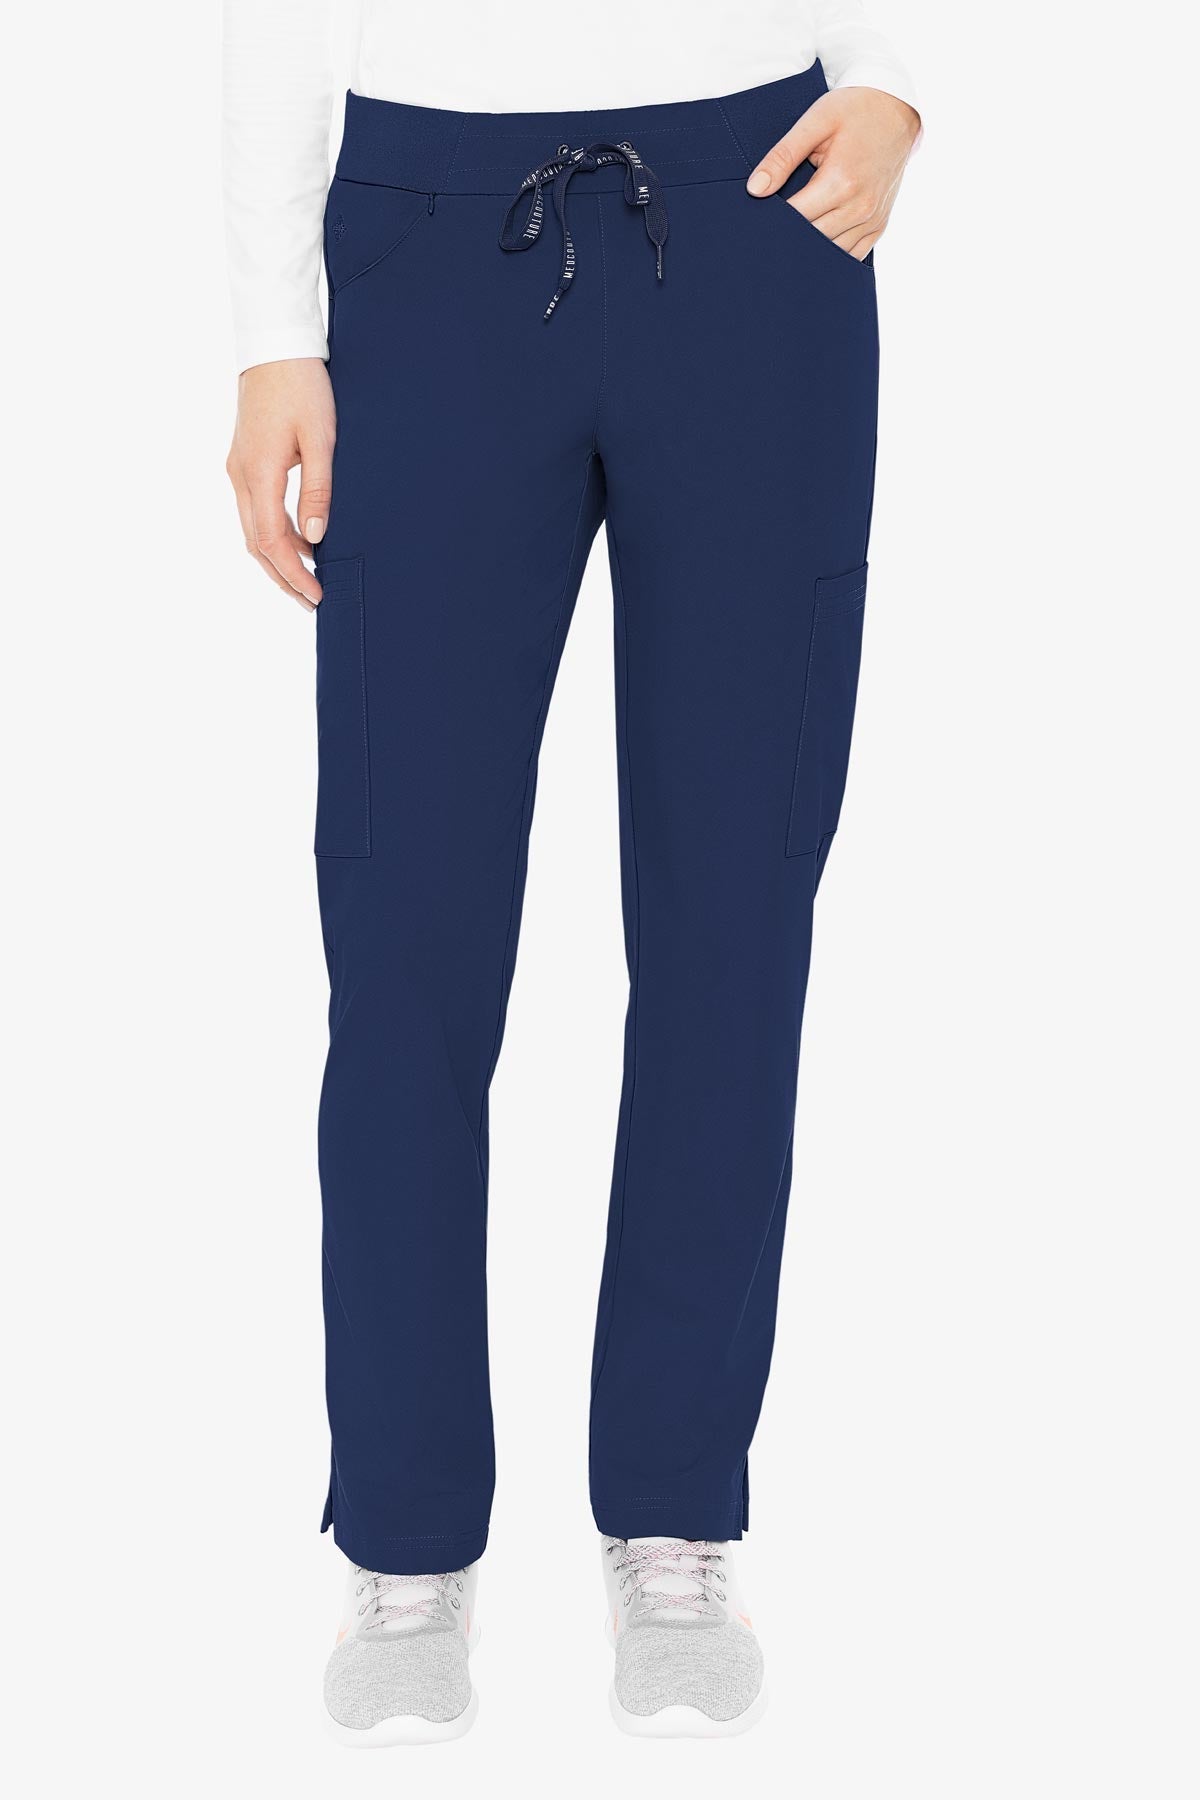 Med Couture 8733 Peaches Yoga Waist Pant - Navy